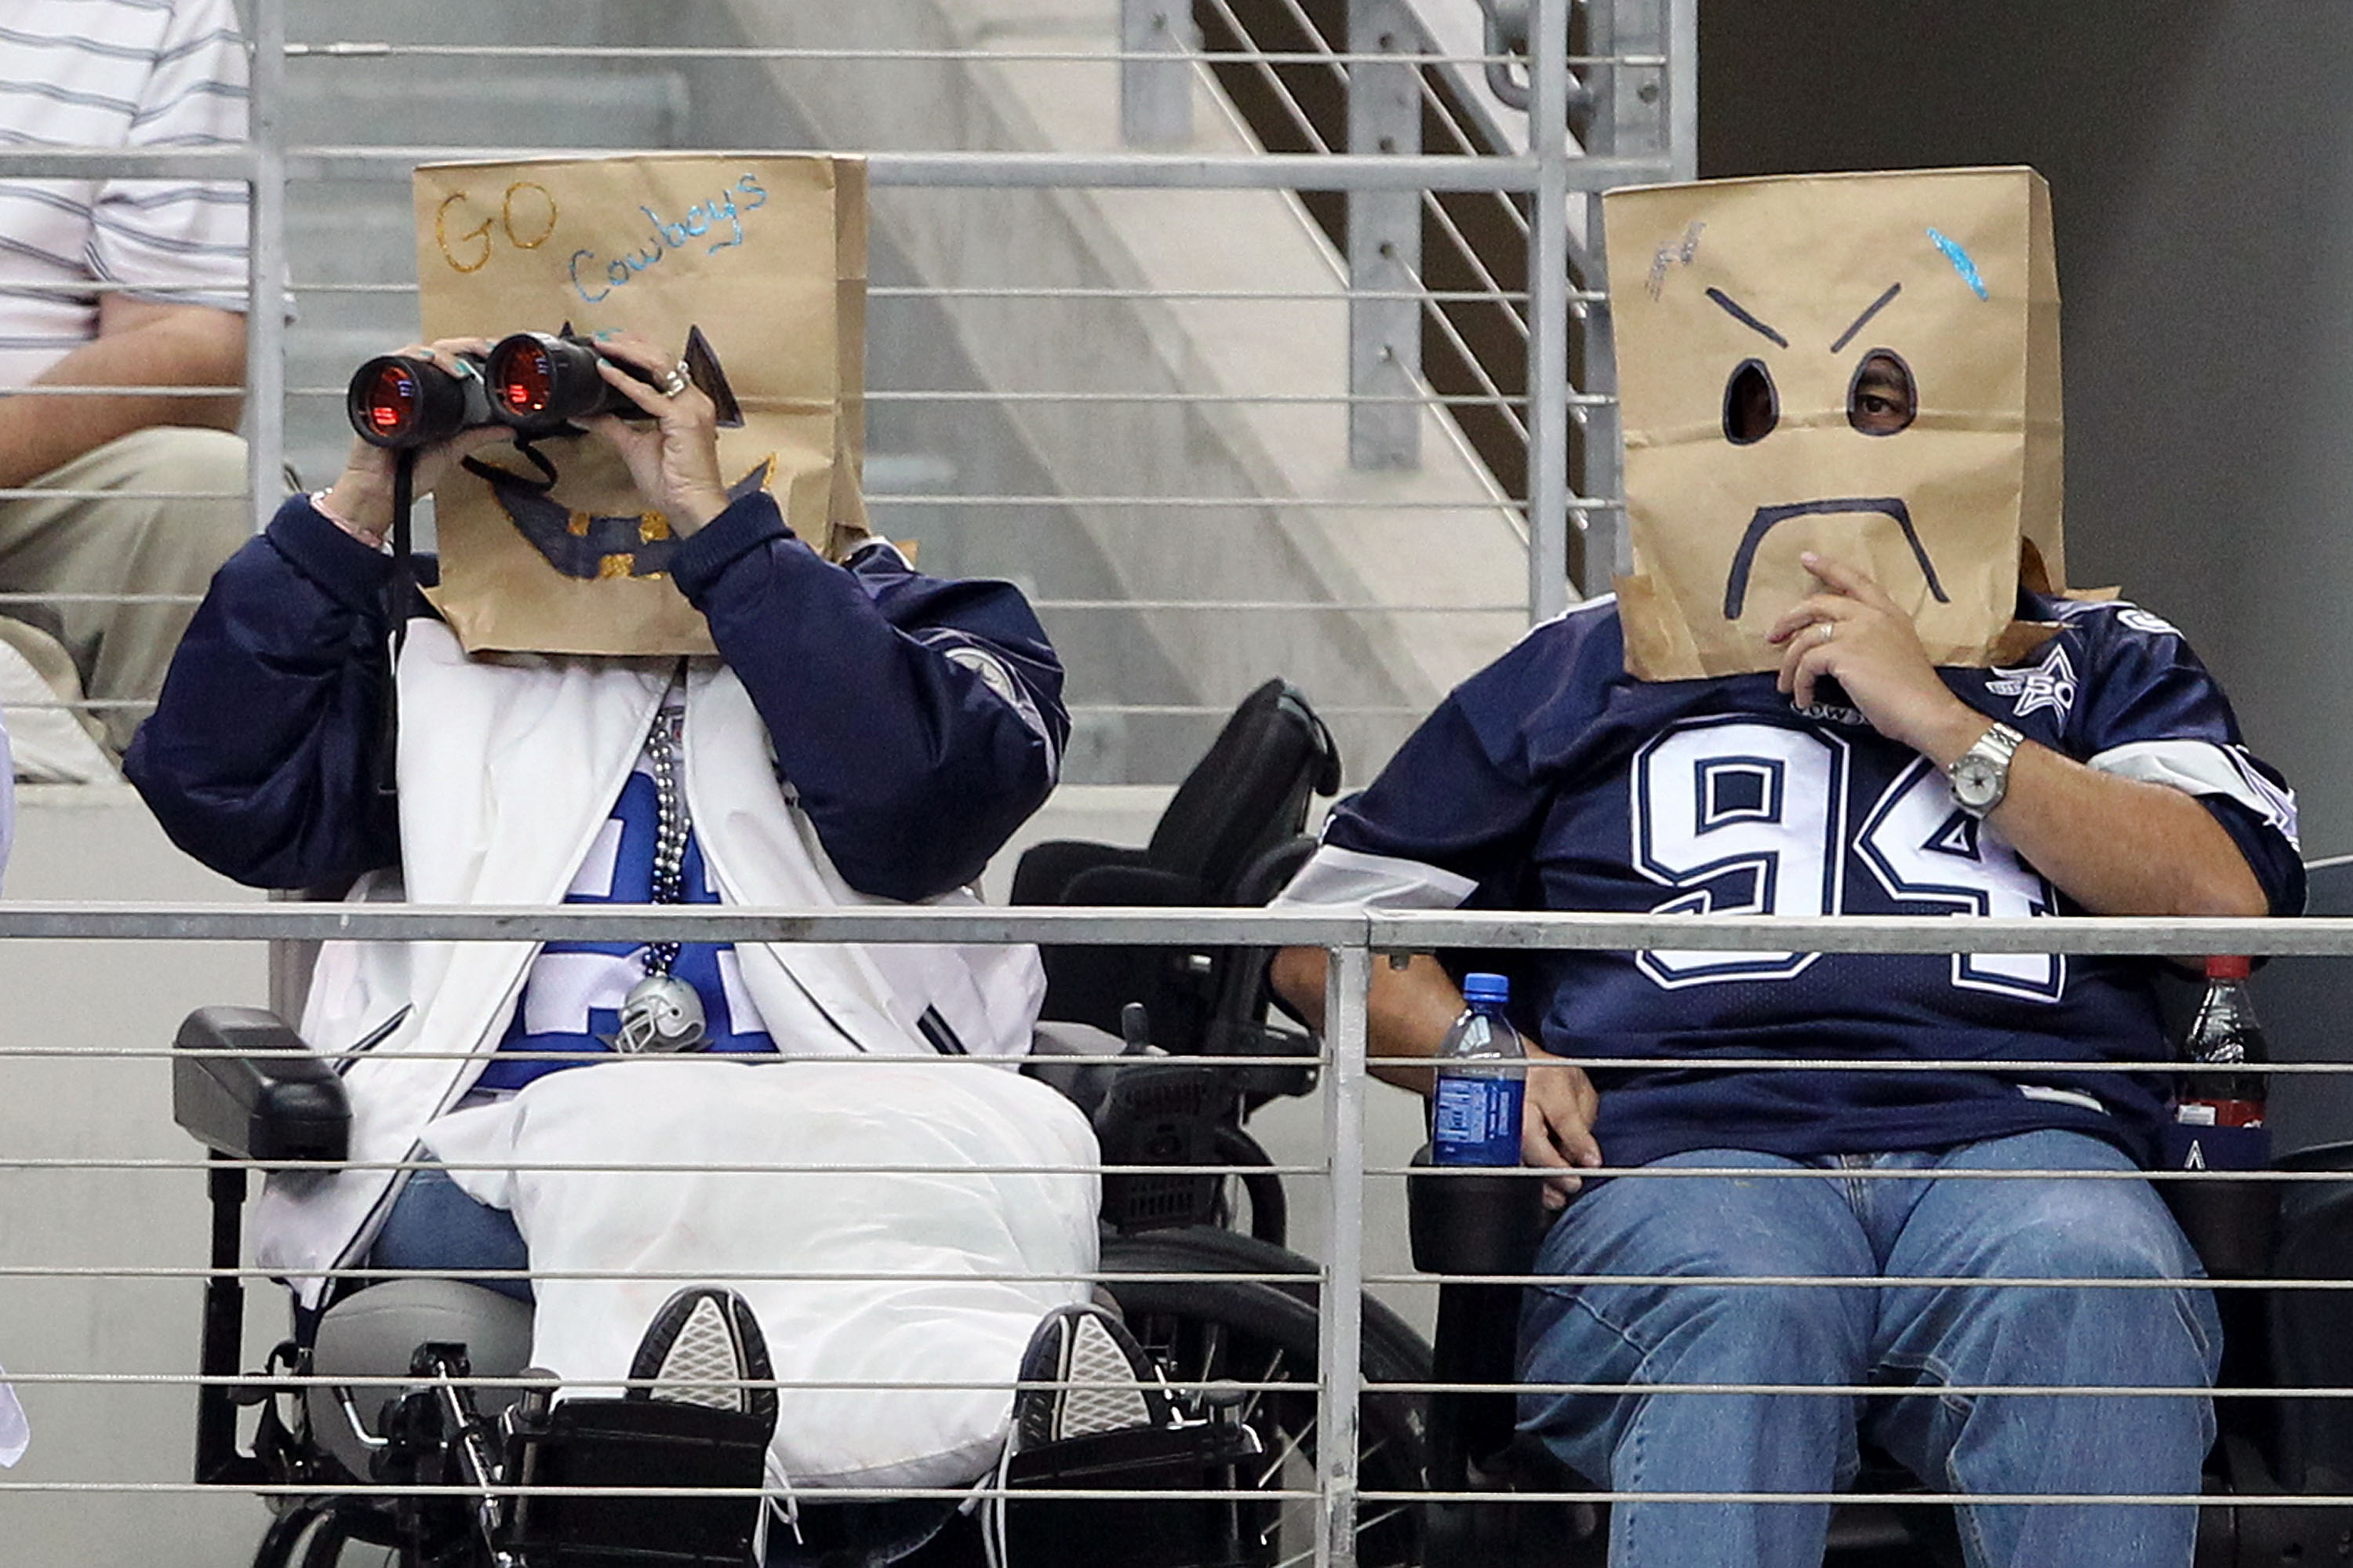 ARLINGTON, TX - OCTOBER 31:  Fans of the Dallas Cowboys wear brown paper bags over their head as they watch the Cowboys play against the Jacksonville Jaguars at Cowboys Stadium on October 31, 2010 in Arlington, Texas.  (Photo by Chris Chambers/Getty Image